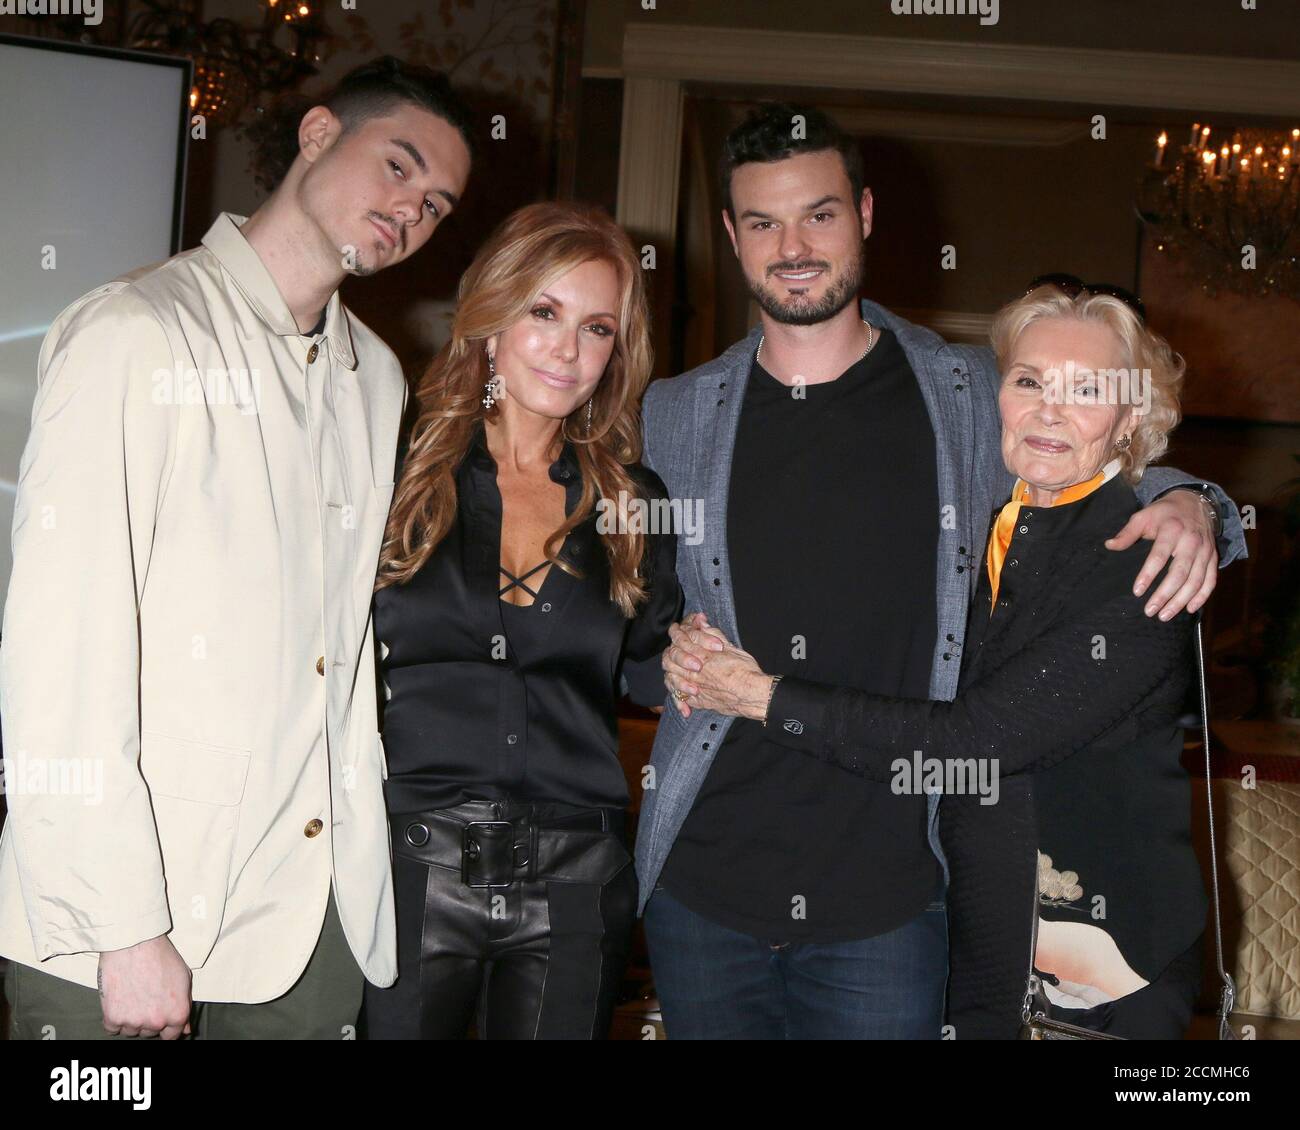 LOS ANGELES - FEB 2:  Landon Recht, Tracey Bregman, Austin Recht, Suzanne Lloyd at the Tracey Bregman 35th Anniversary on the Young and the Restless at CBS TV City on February 2, 2018 in Los Angeles, CA Stock Photo